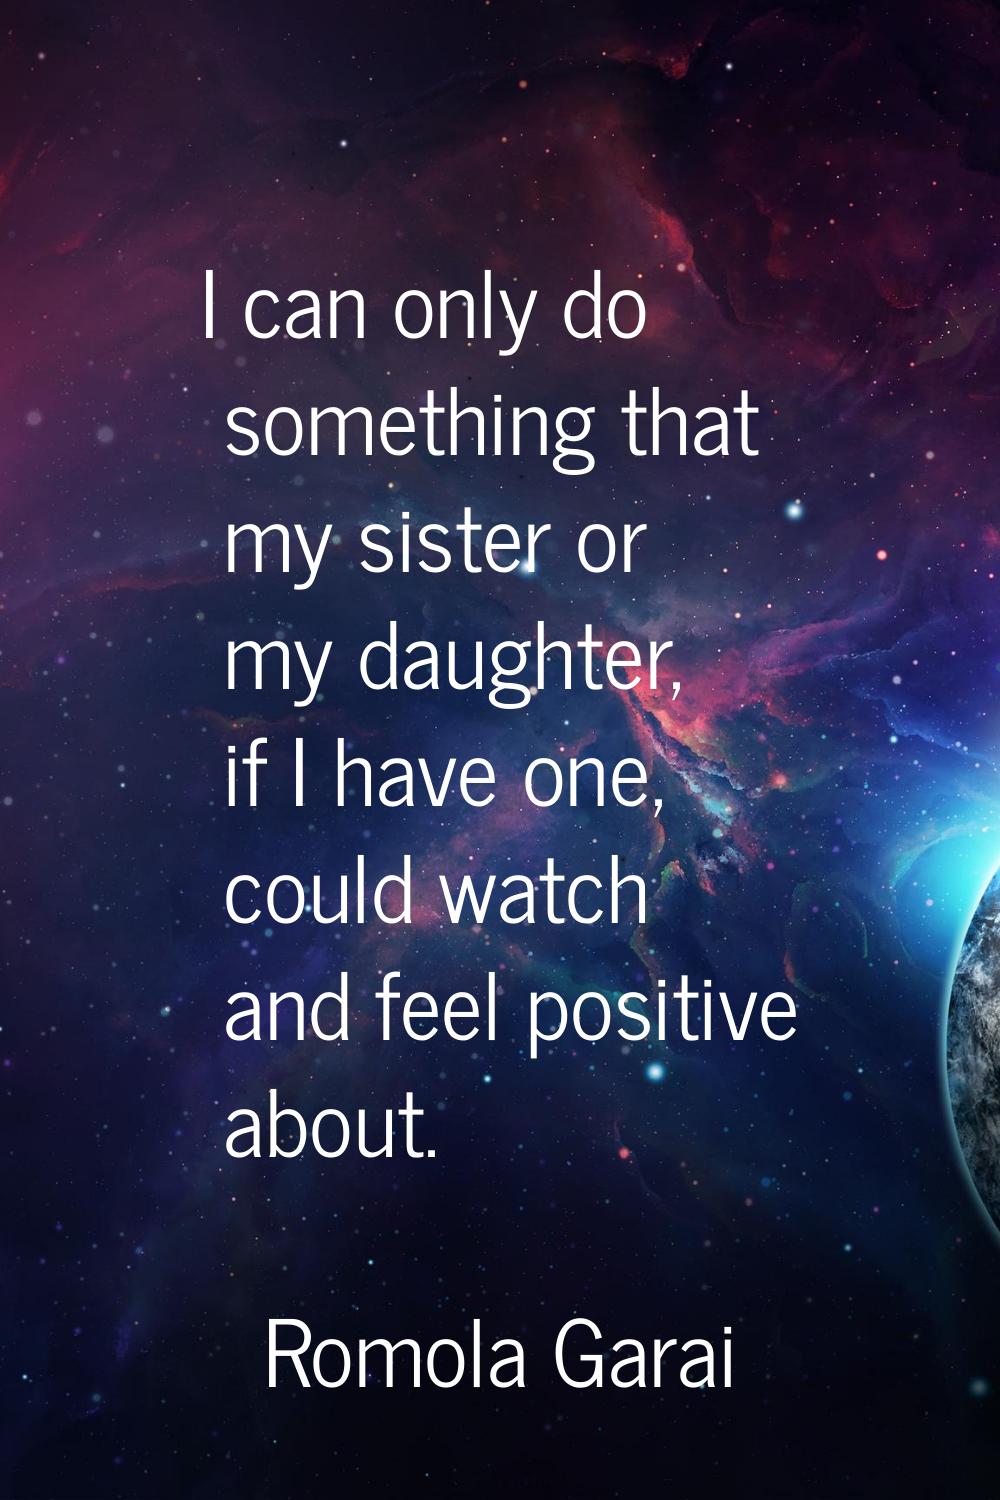 I can only do something that my sister or my daughter, if I have one, could watch and feel positive